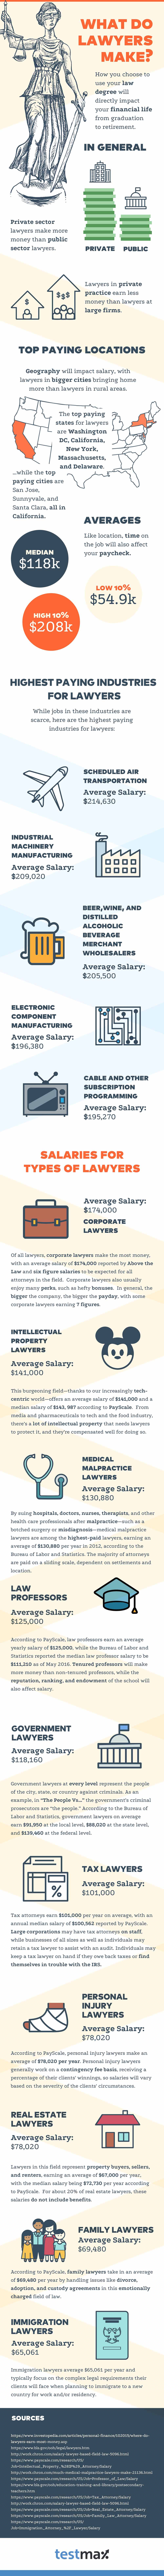 What's the Average Salary of Lawyers by Field?